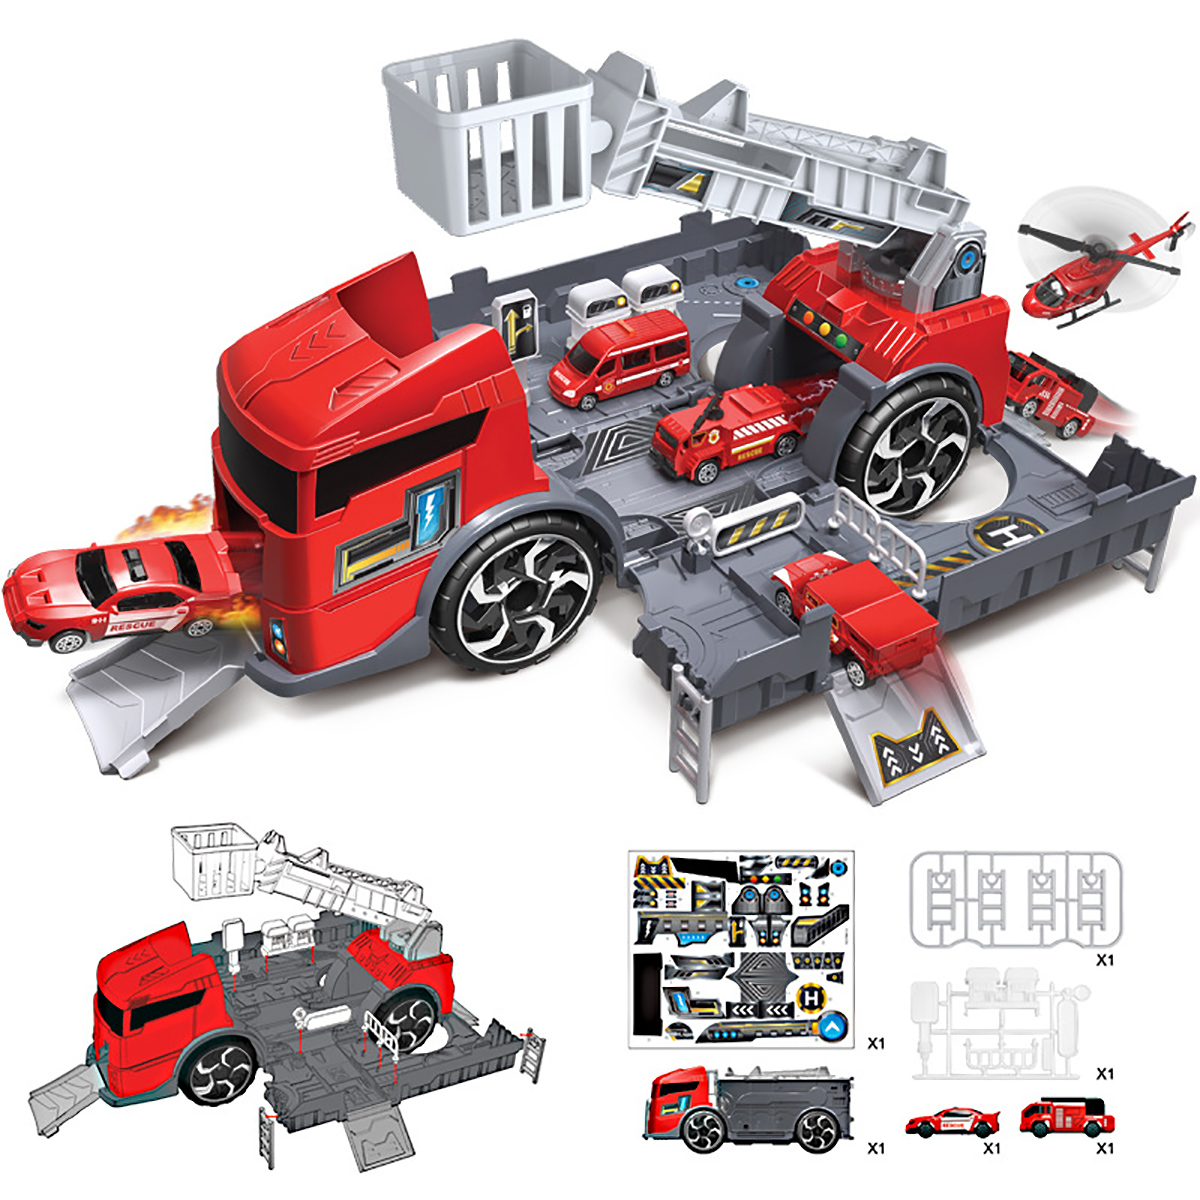 1:24 Scale Truck Car Model Car Engineering Trailer Loader Truck Car Kids Toy Birthday/Holiday Gifts - image 4 of 12